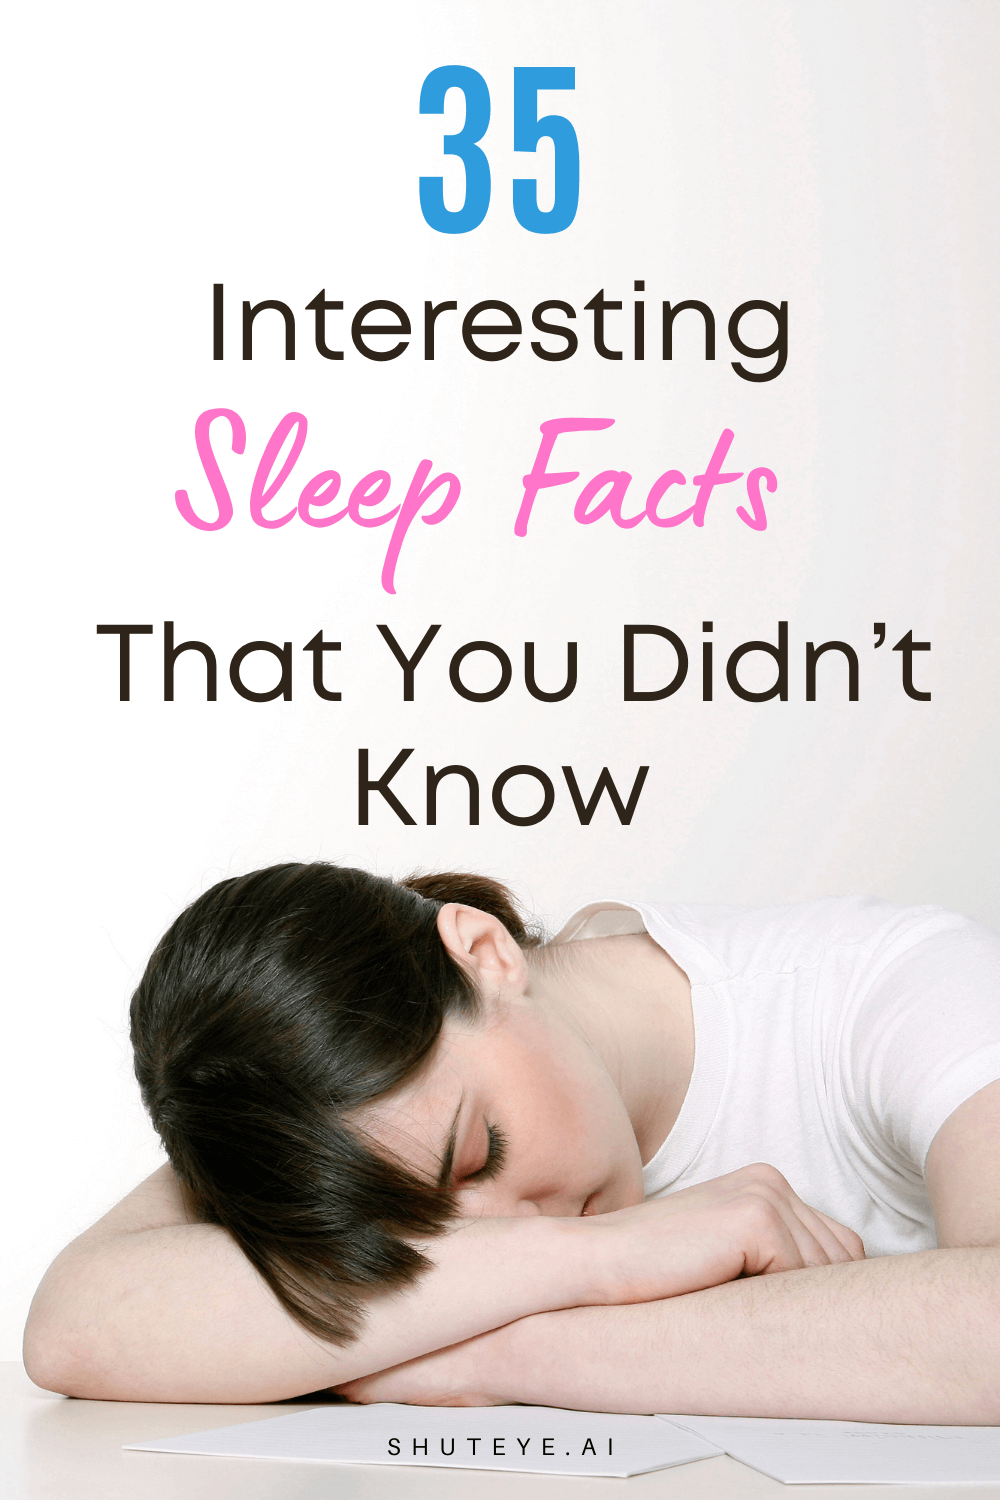 35 Interesting Sleep Facts That You Didn’t Know!